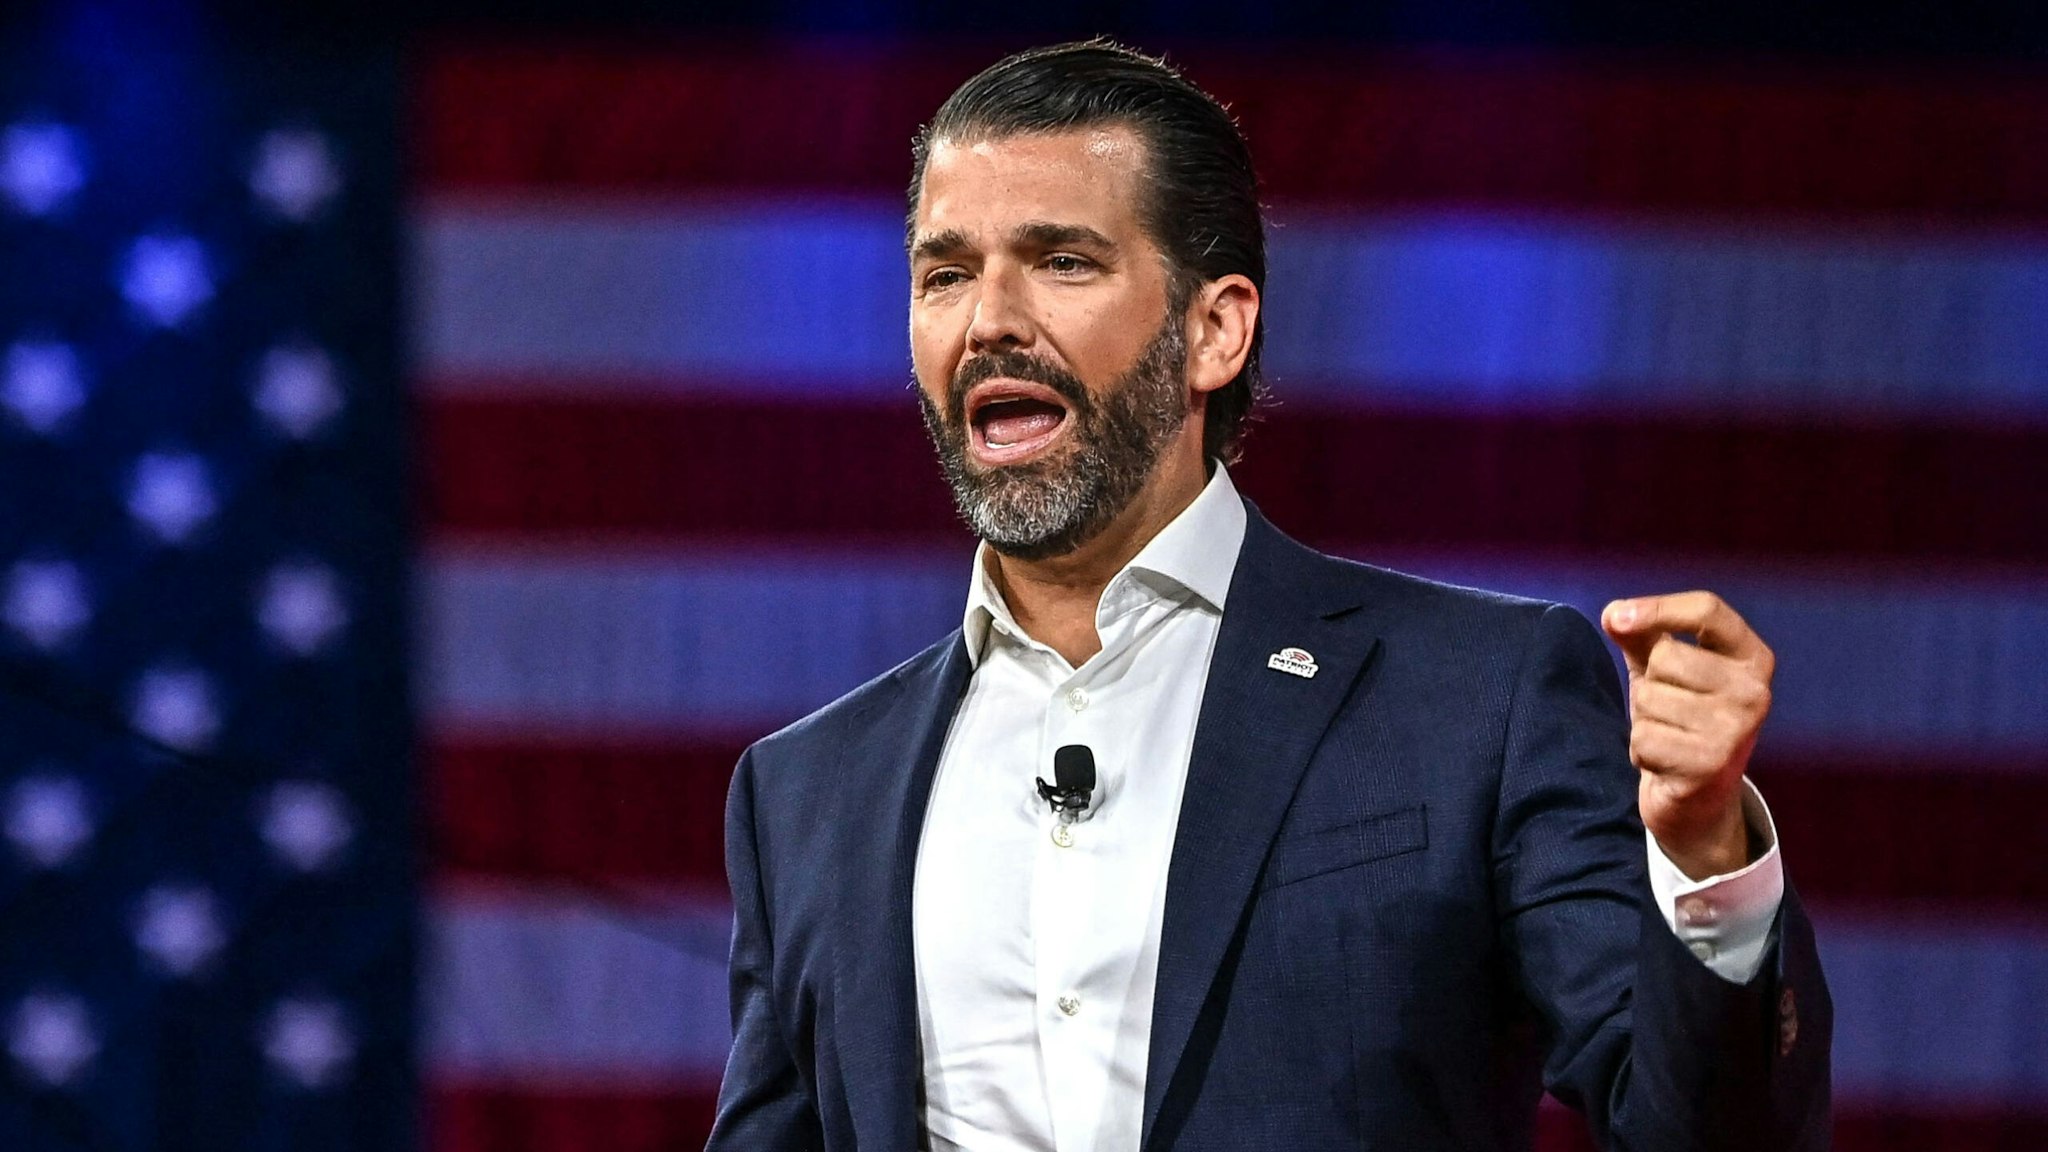 Former US President Donald Trump's son Donald Trump Jr. speaks at the Conservative Political Action Conference 2022 (CPAC) in Orlando, Florida on February 27, 2022.